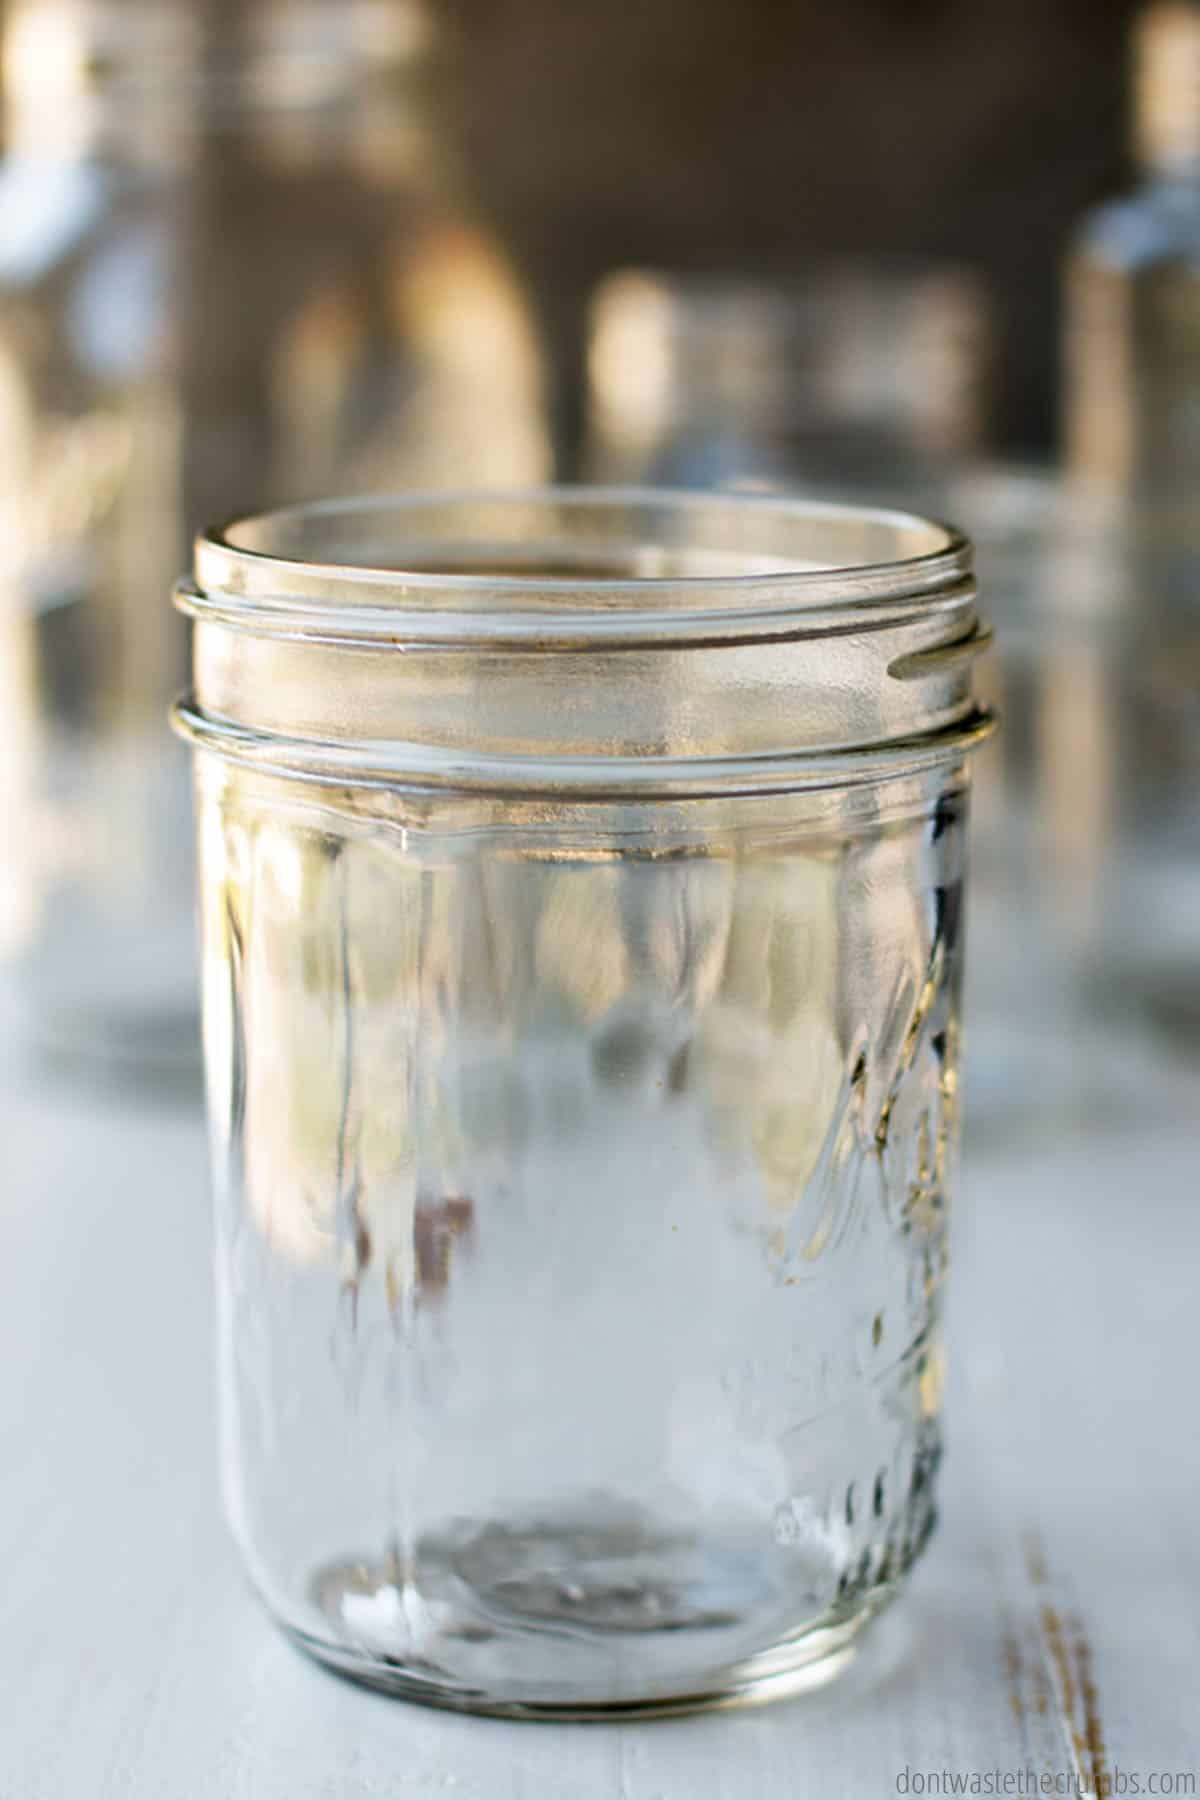 This pint size mason jar has straight edges and a wide mouth.